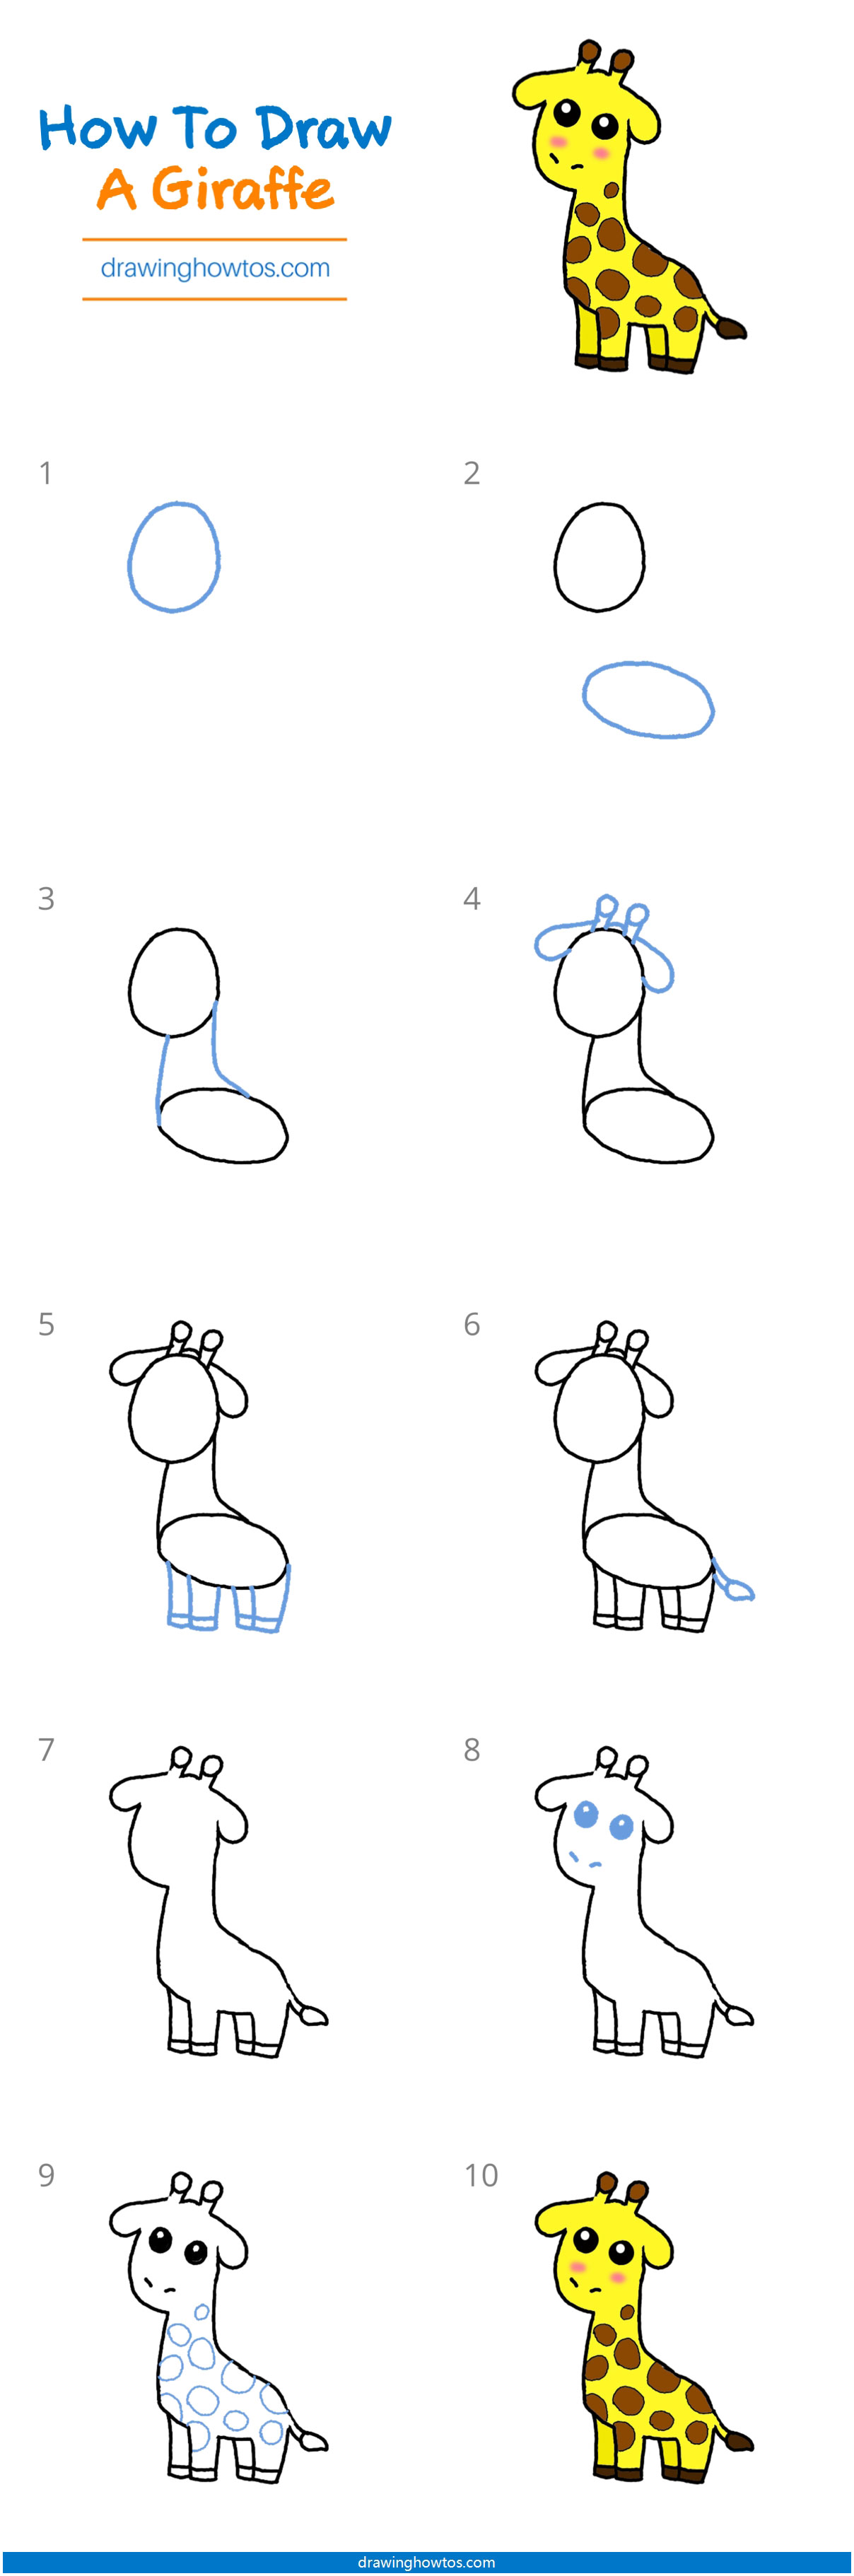 How to Draw a Giraffe Step by Step Easy Drawing Guides Drawing Howtos